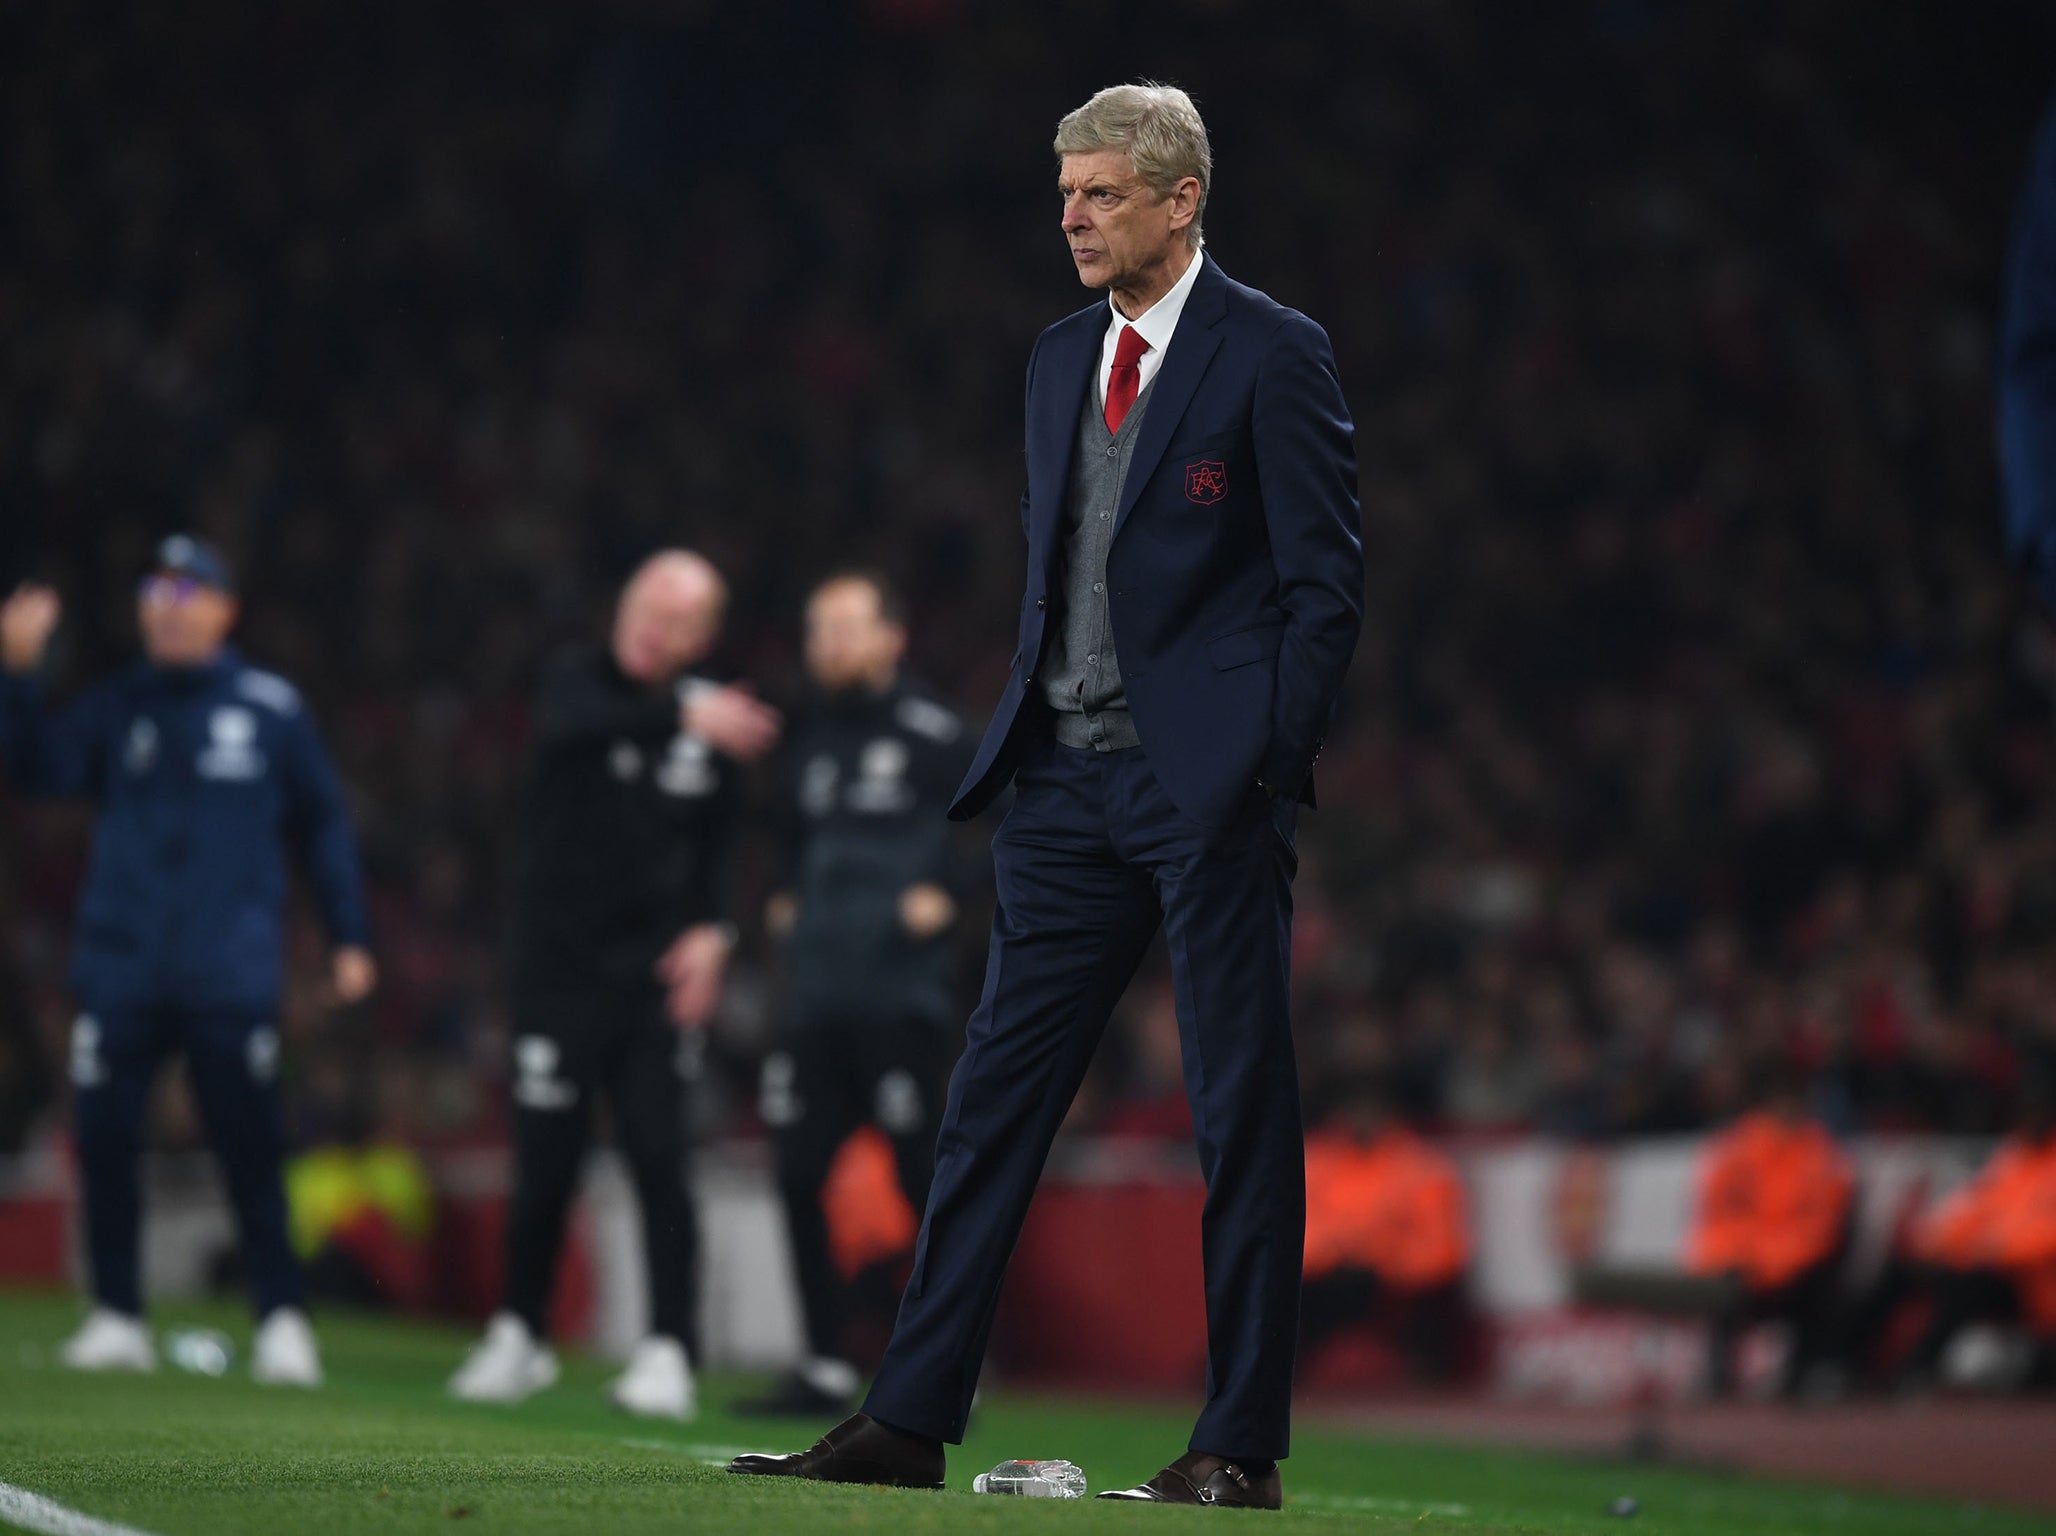 Perhaps unsurprisingly Wenger defended the referee's decision